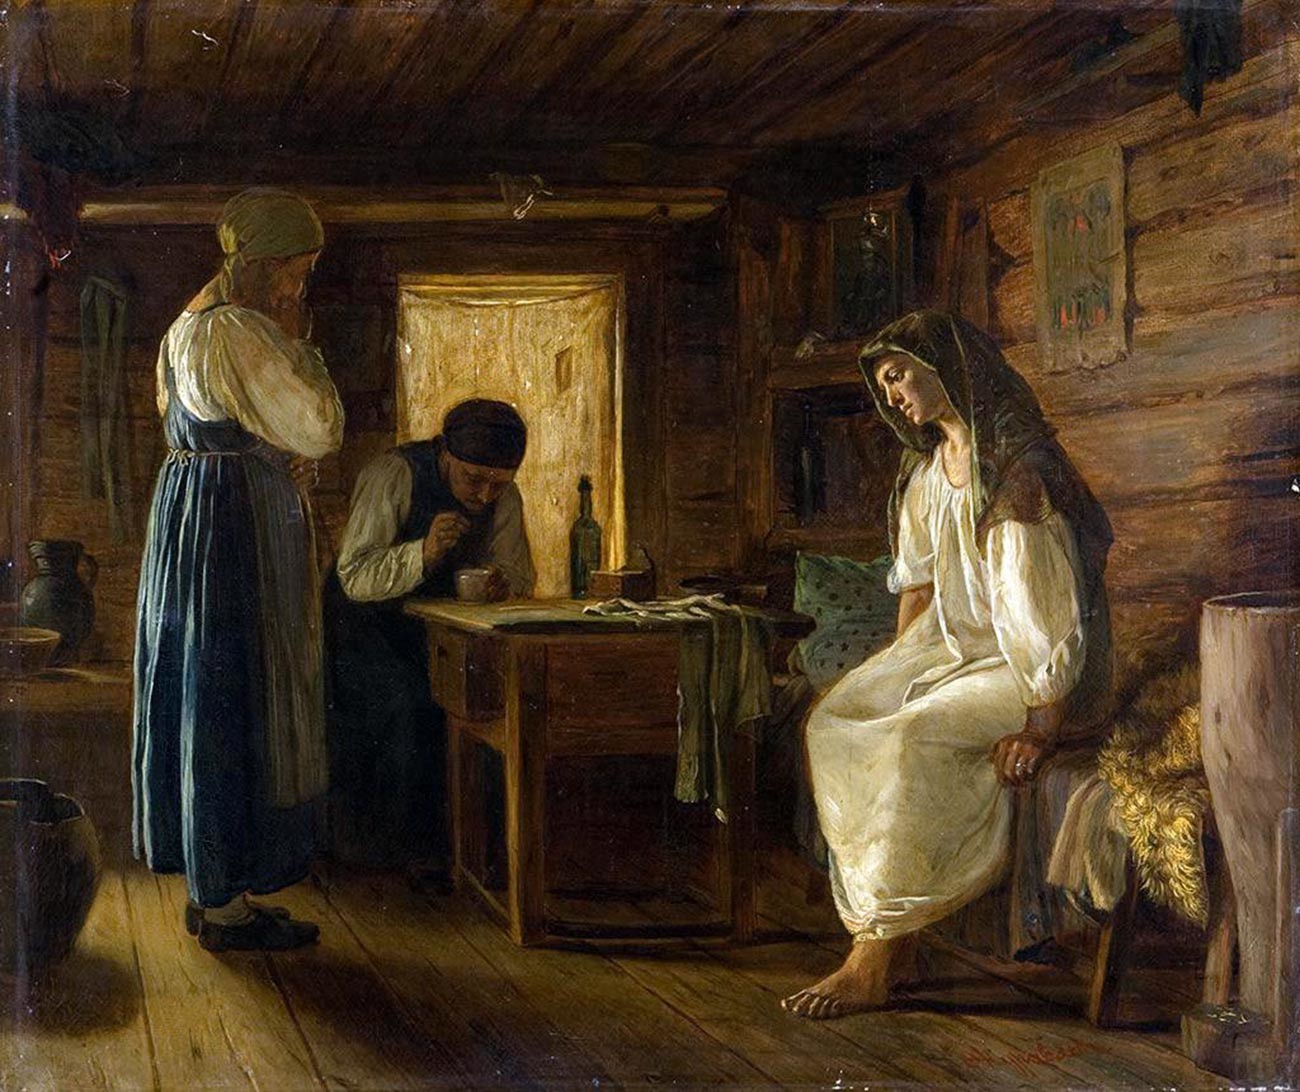 'The Wise Woman', by Firs Zhuravlev. Village sorceresses were the ones who could help getting rid of a pregnancy.